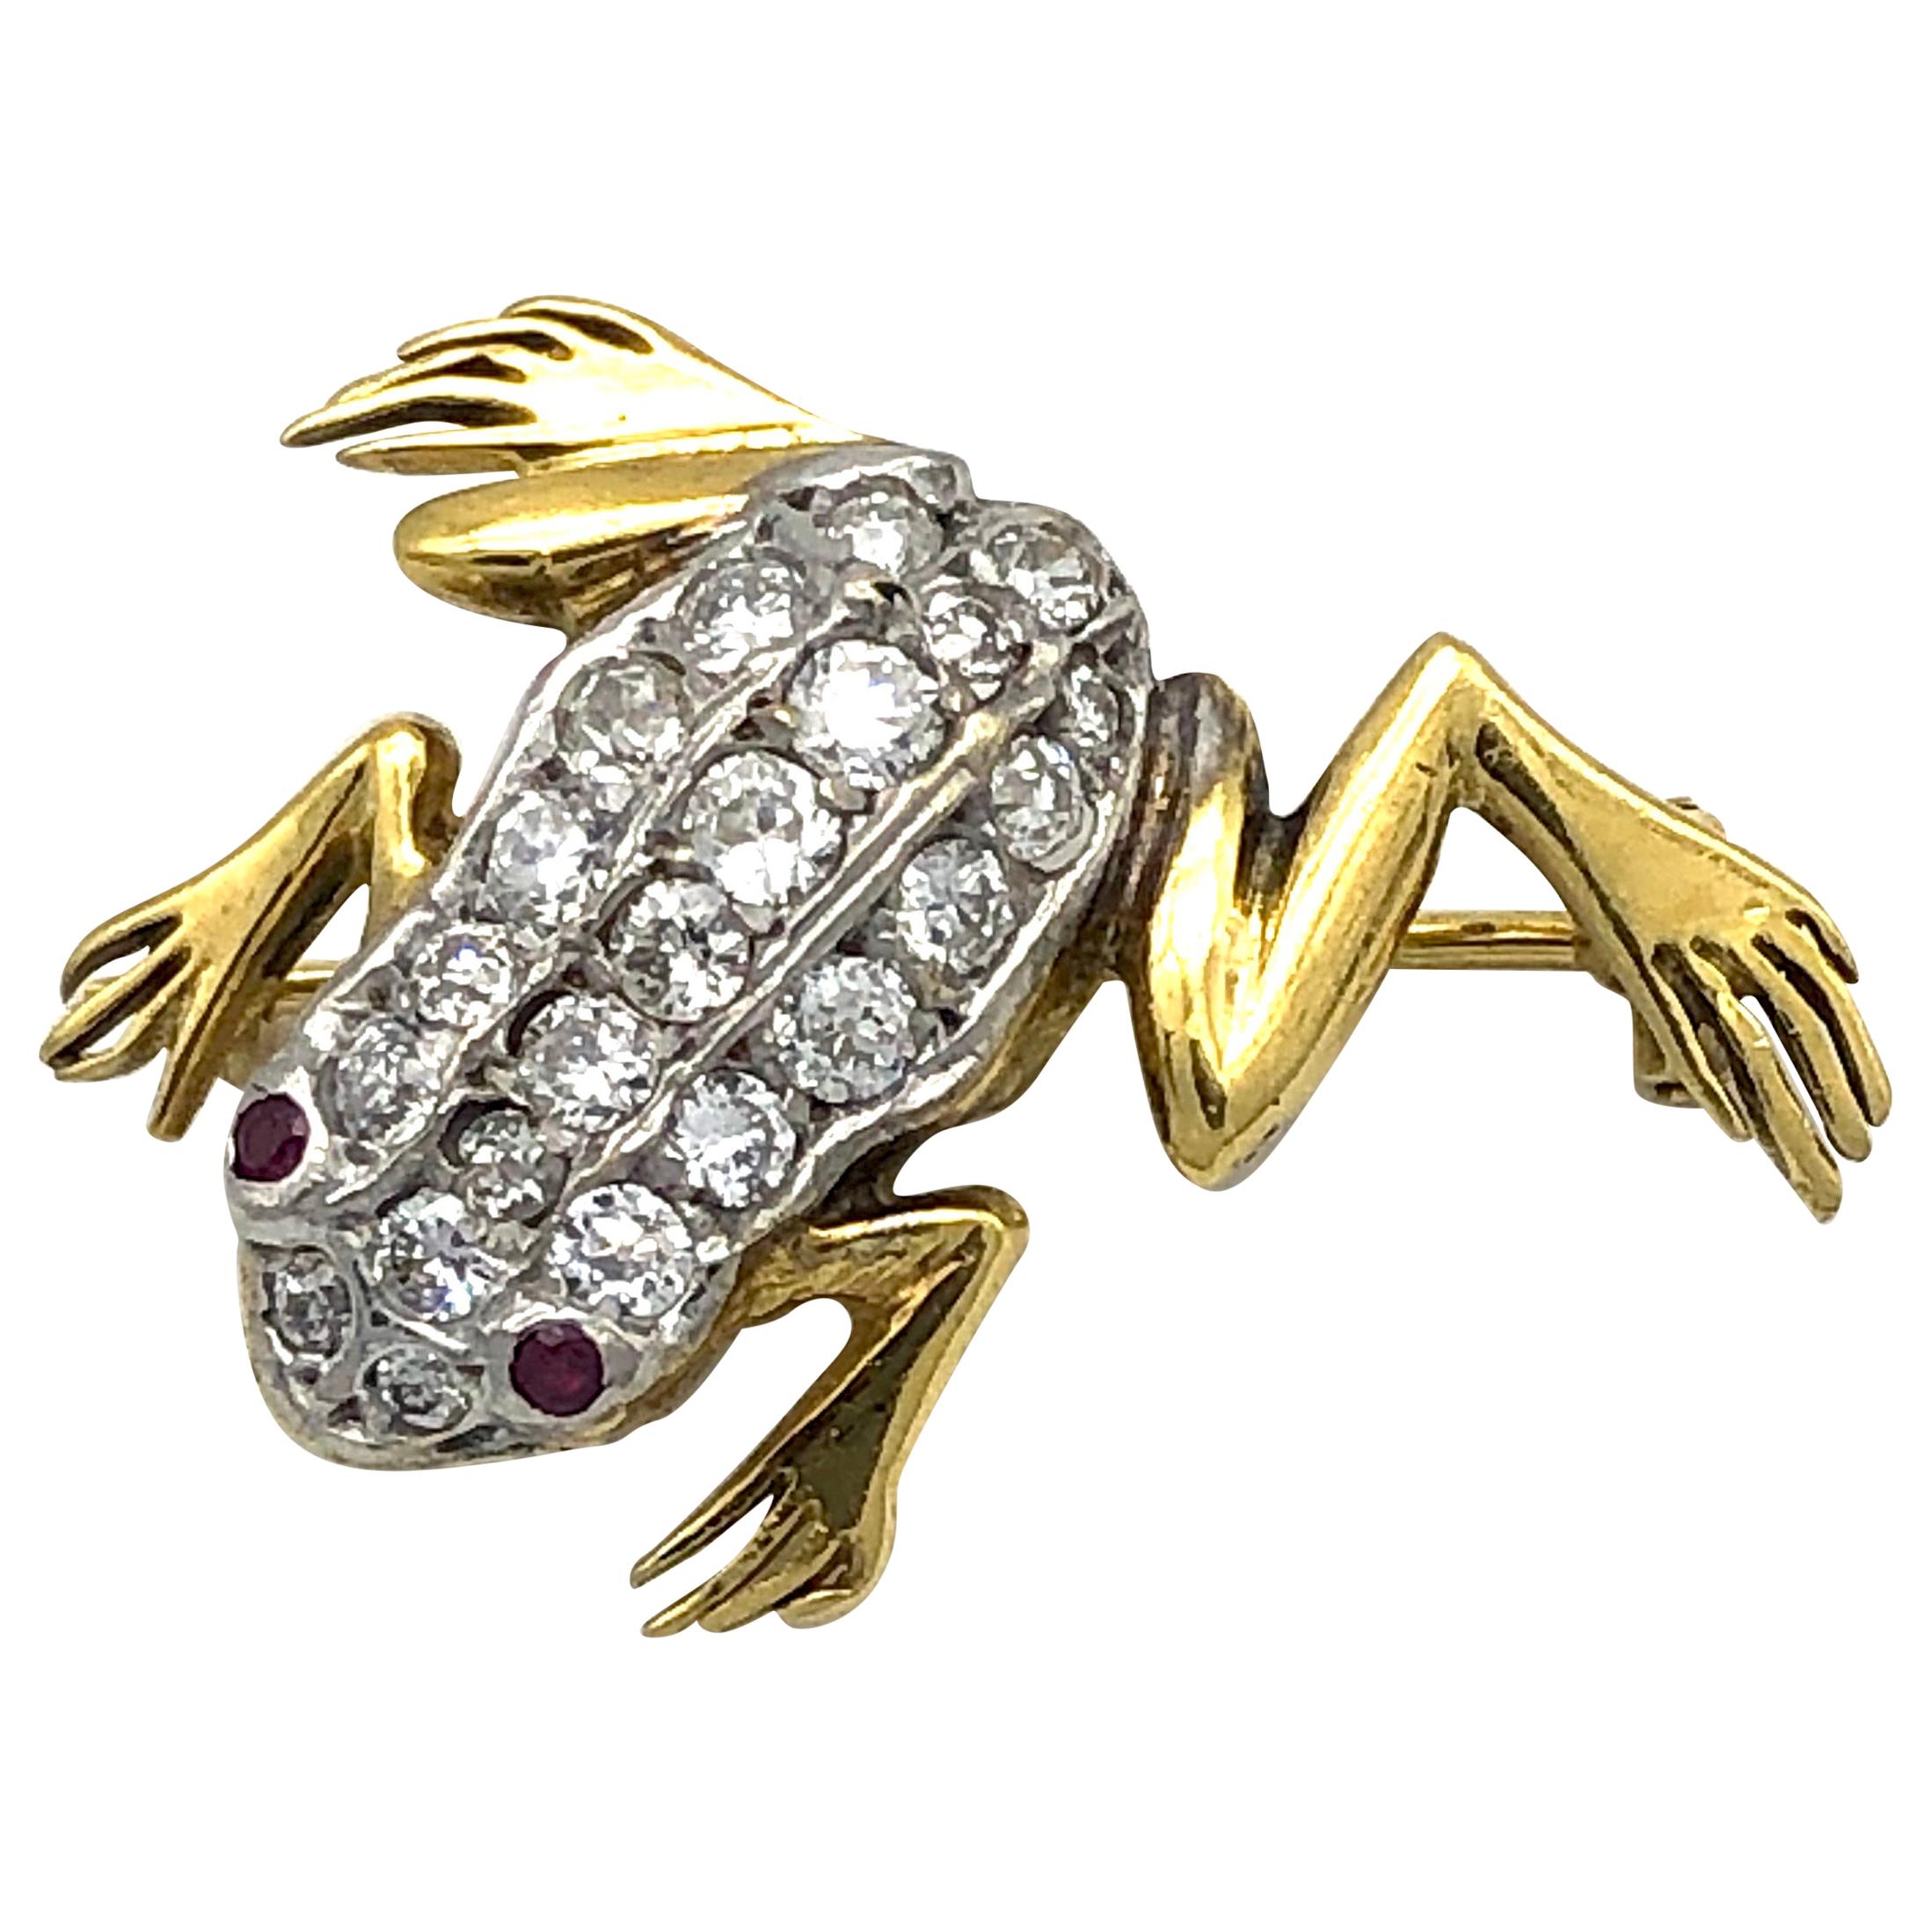 Crystal Green Enamel Insect Animal Brooches Pins Vintage Jewelry Frog Insect Brooch Pin for Women 